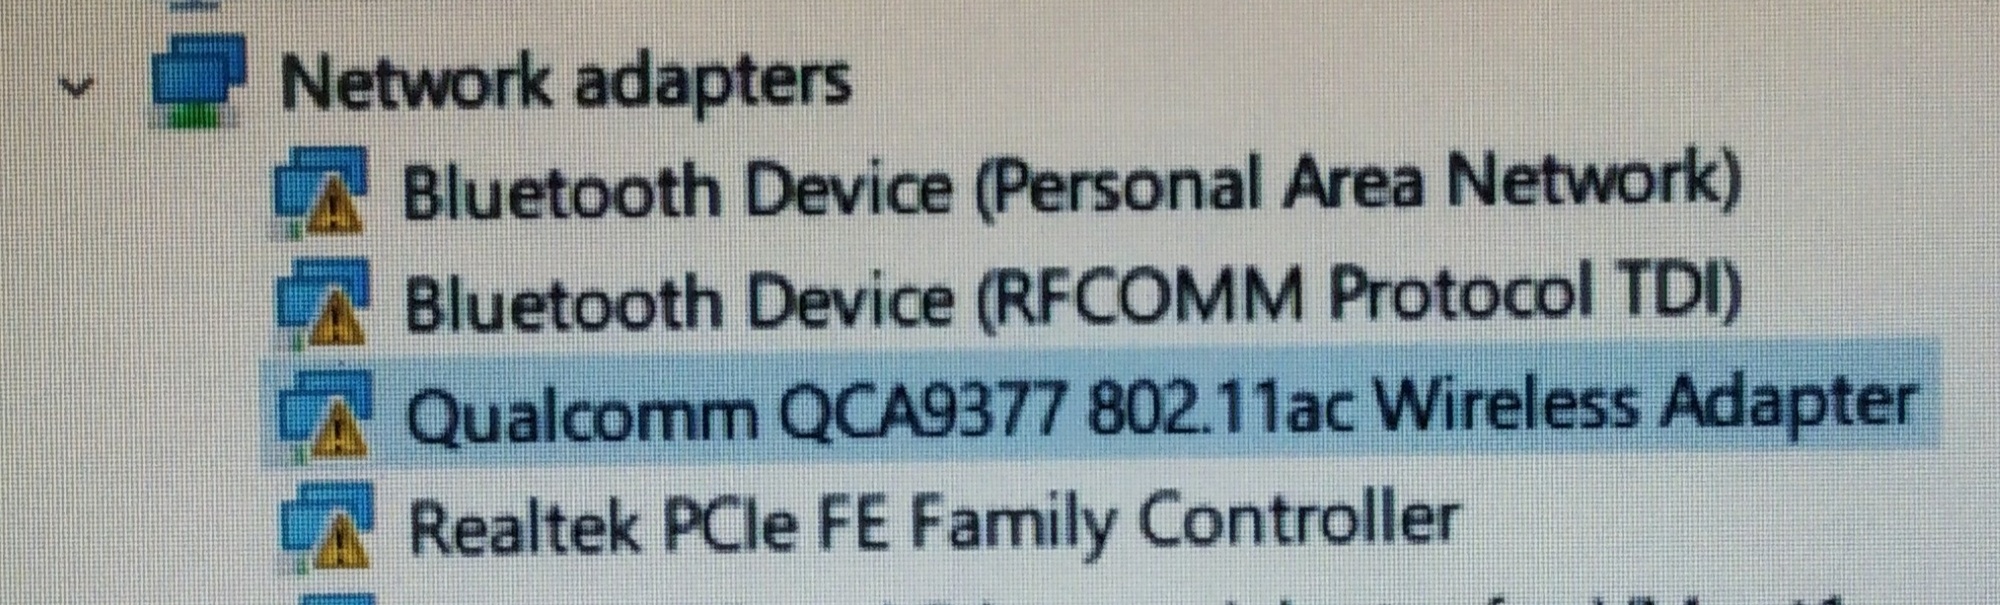 Help! Windows is still setting up the class configuration for this device. (Code 56) 956a329c-febd-46a4-9008-559de852112f?upload=true.jpg